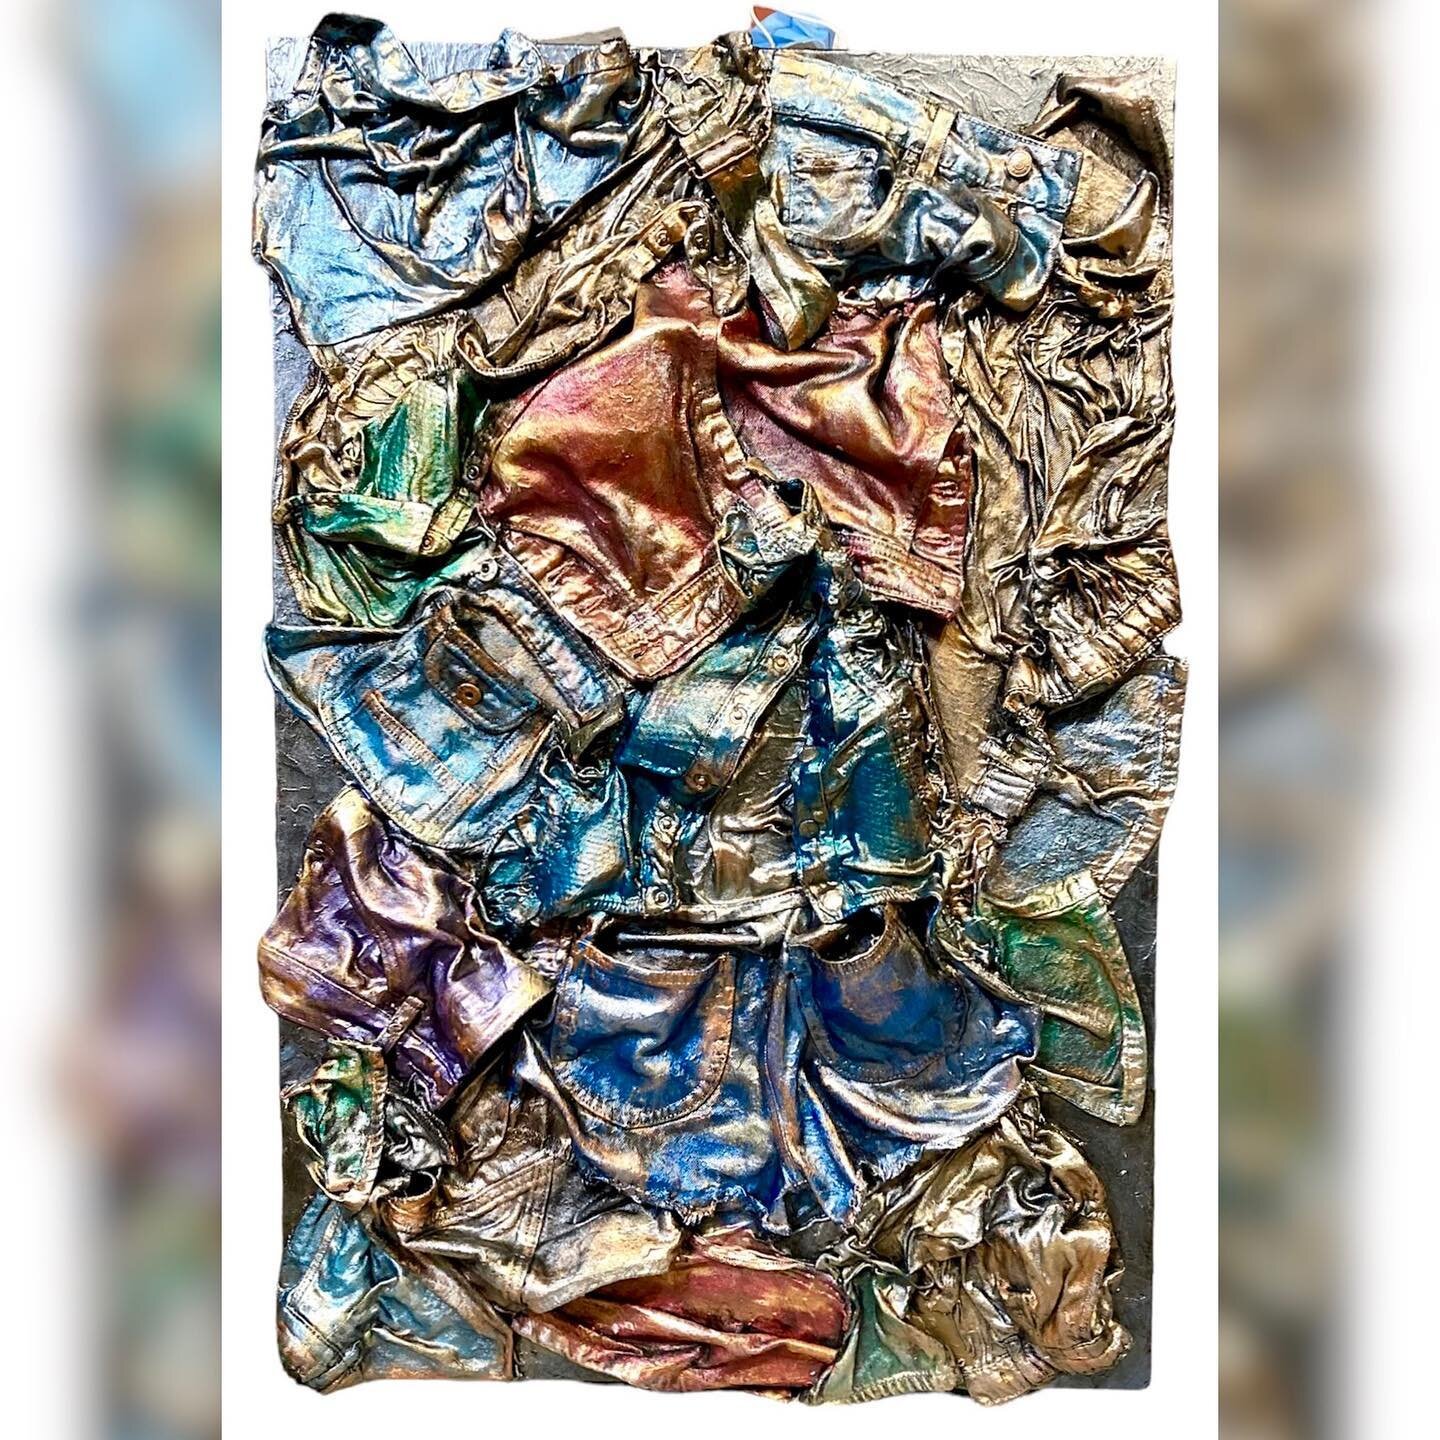 A new variation on a popular piece!
If you saw a similar one and liked it, but missed out the last time, this 3D 24&rdquo;x36&rdquo;, made with repurposed fabric, metallic acrylics, and plastic mesh, will be at the Toronto Art Crawl this June 4, at t